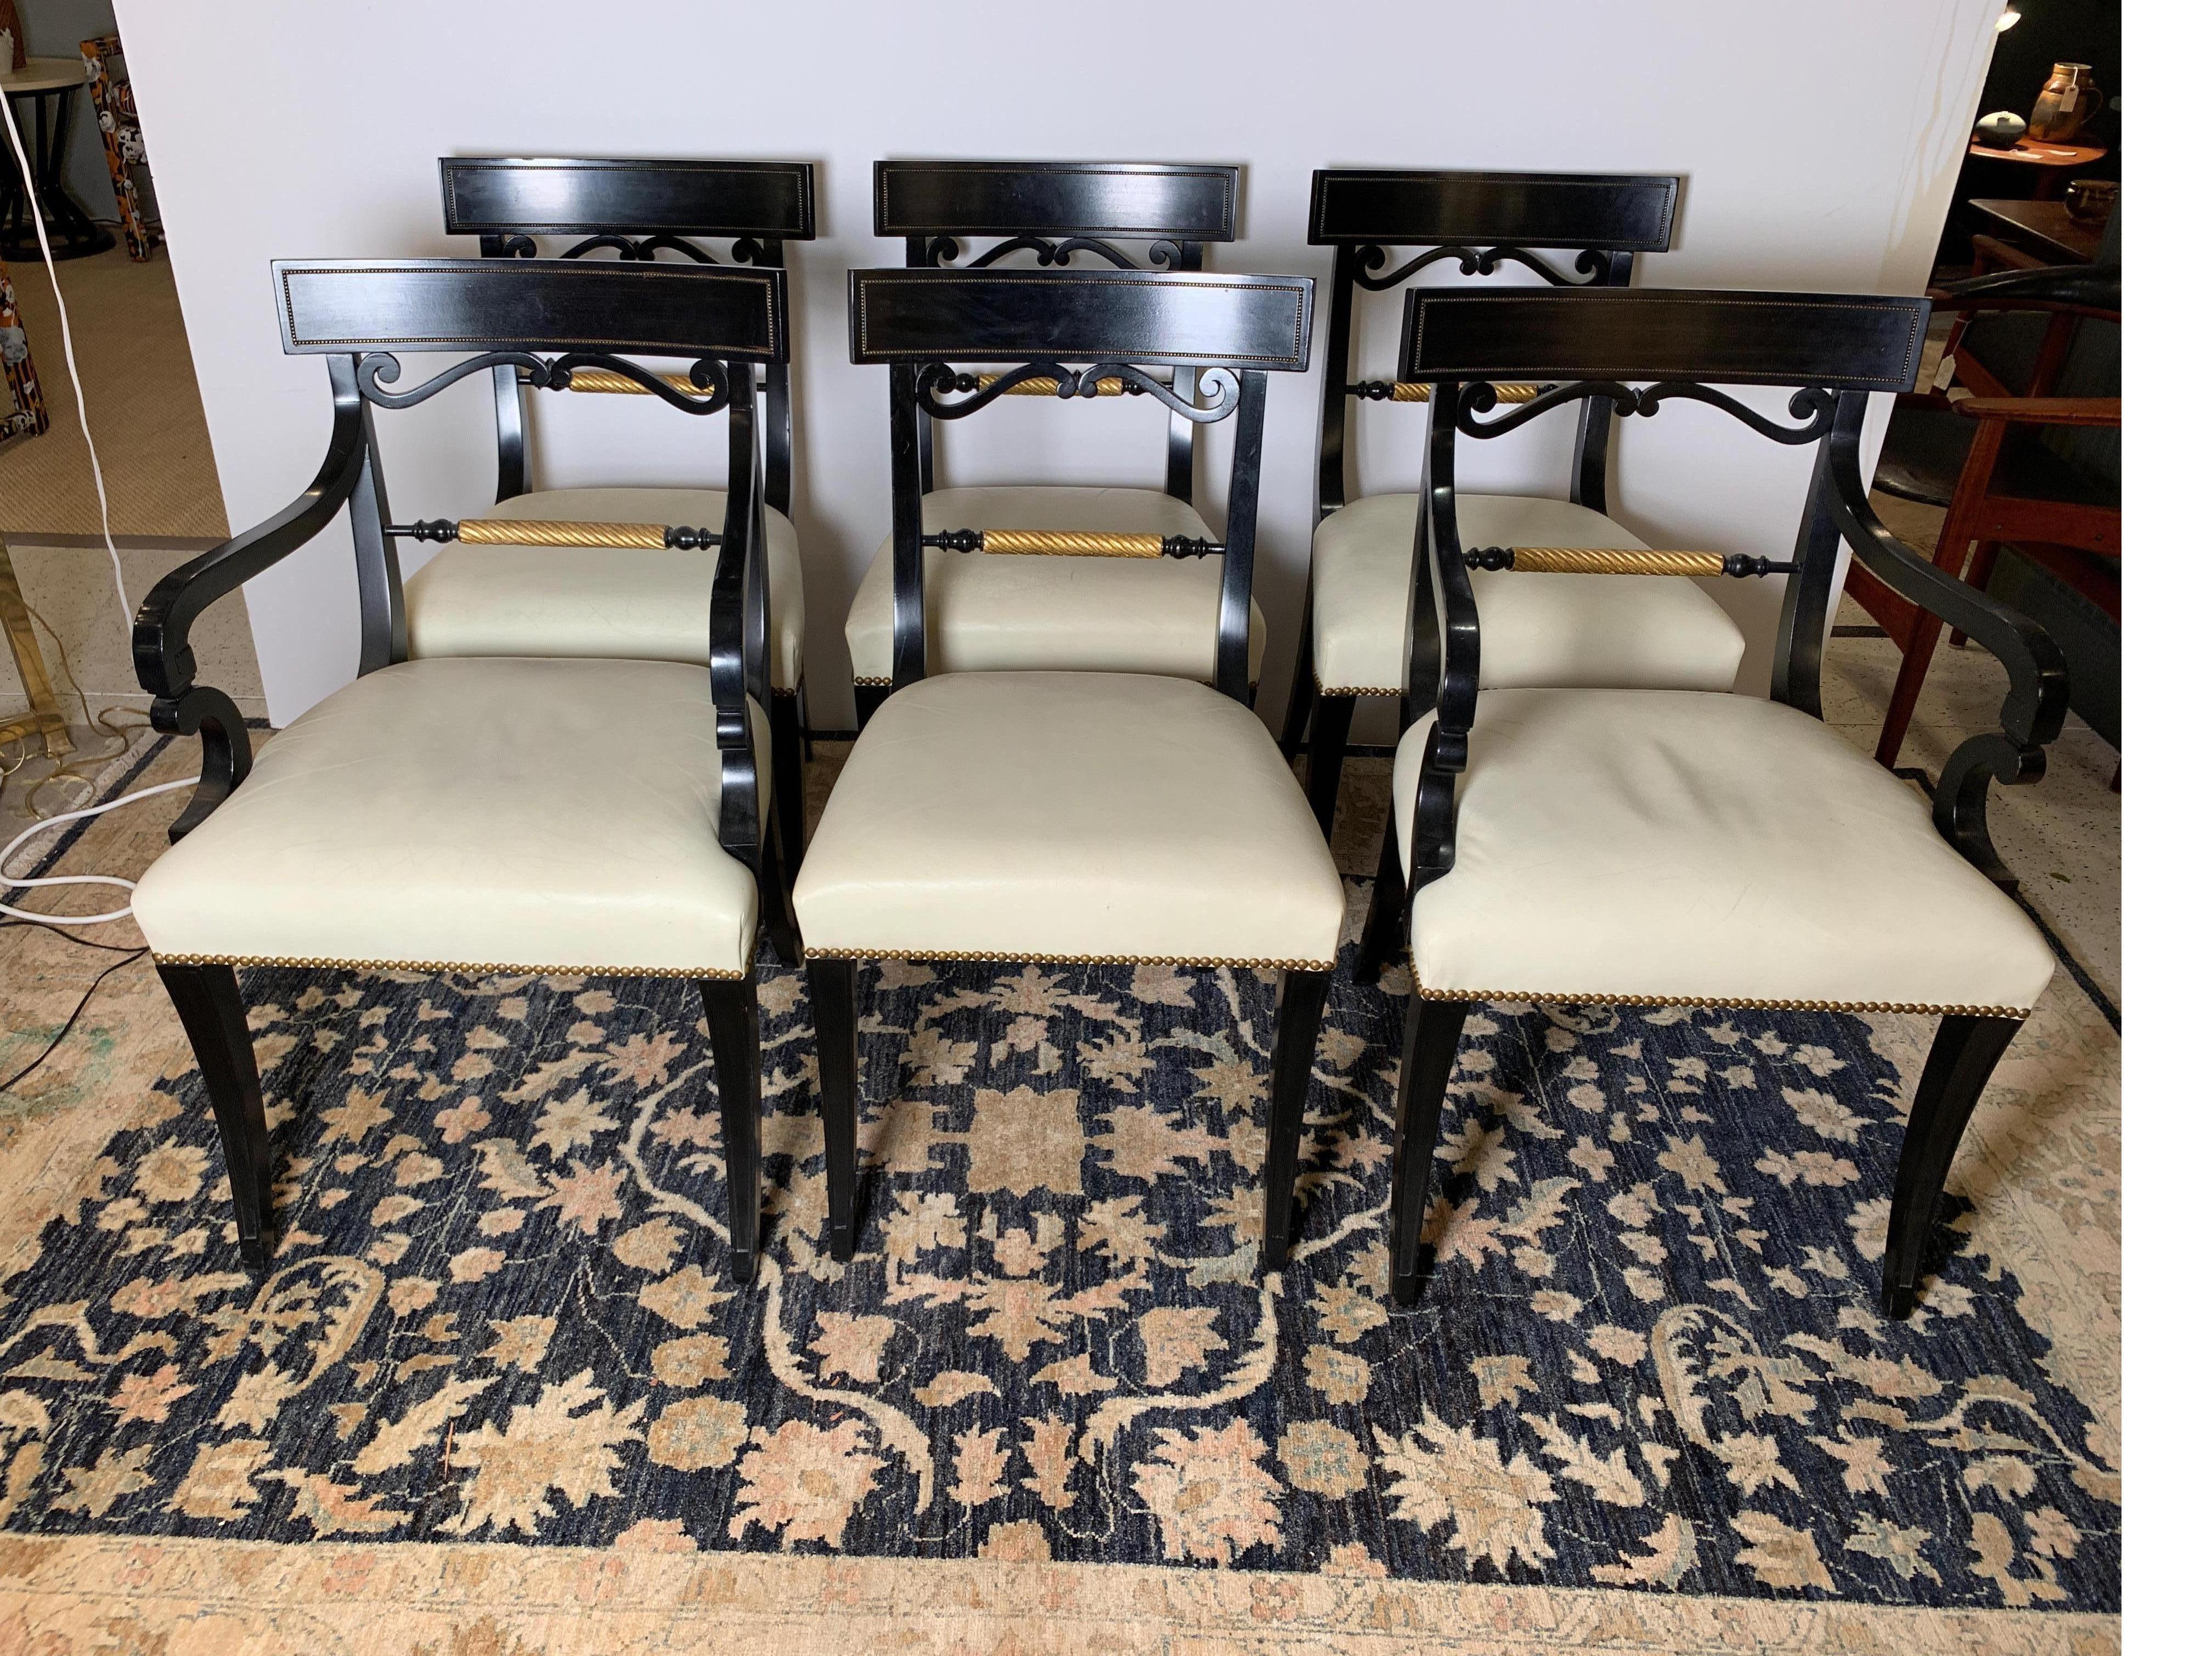 Elegant set of six Regency style dining chairs, ebonized with gold gilt highlights and original cream leather seats. Brass nailhead trim and elegantly curved and tapered legs give this set of two arm chairs and four side chairs a distinguished